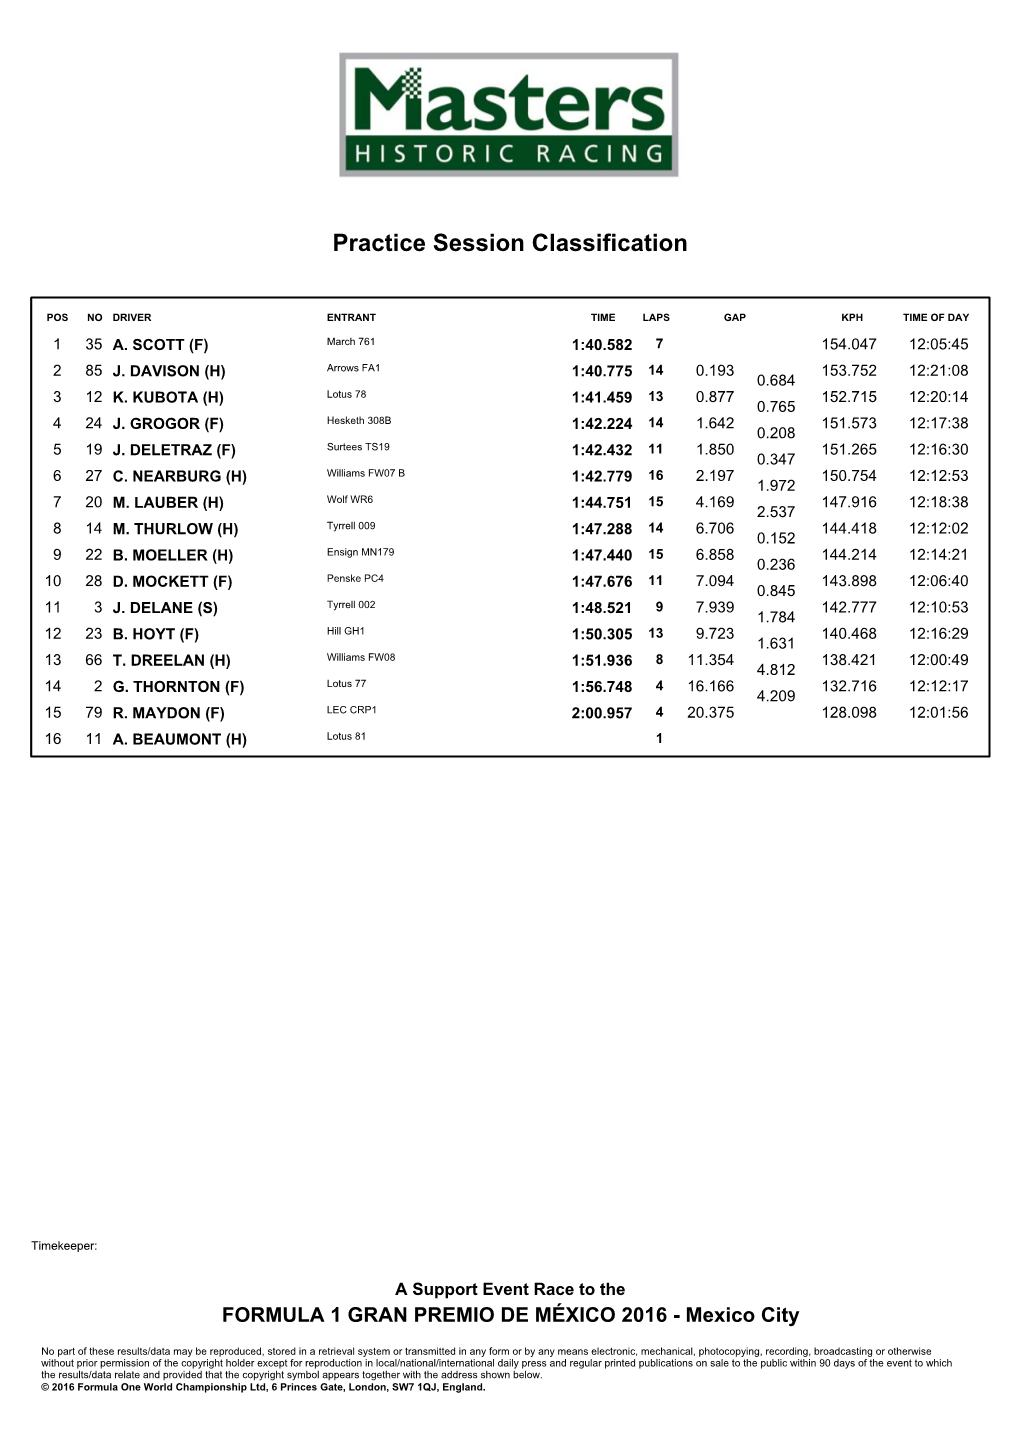 Practice Session Classification